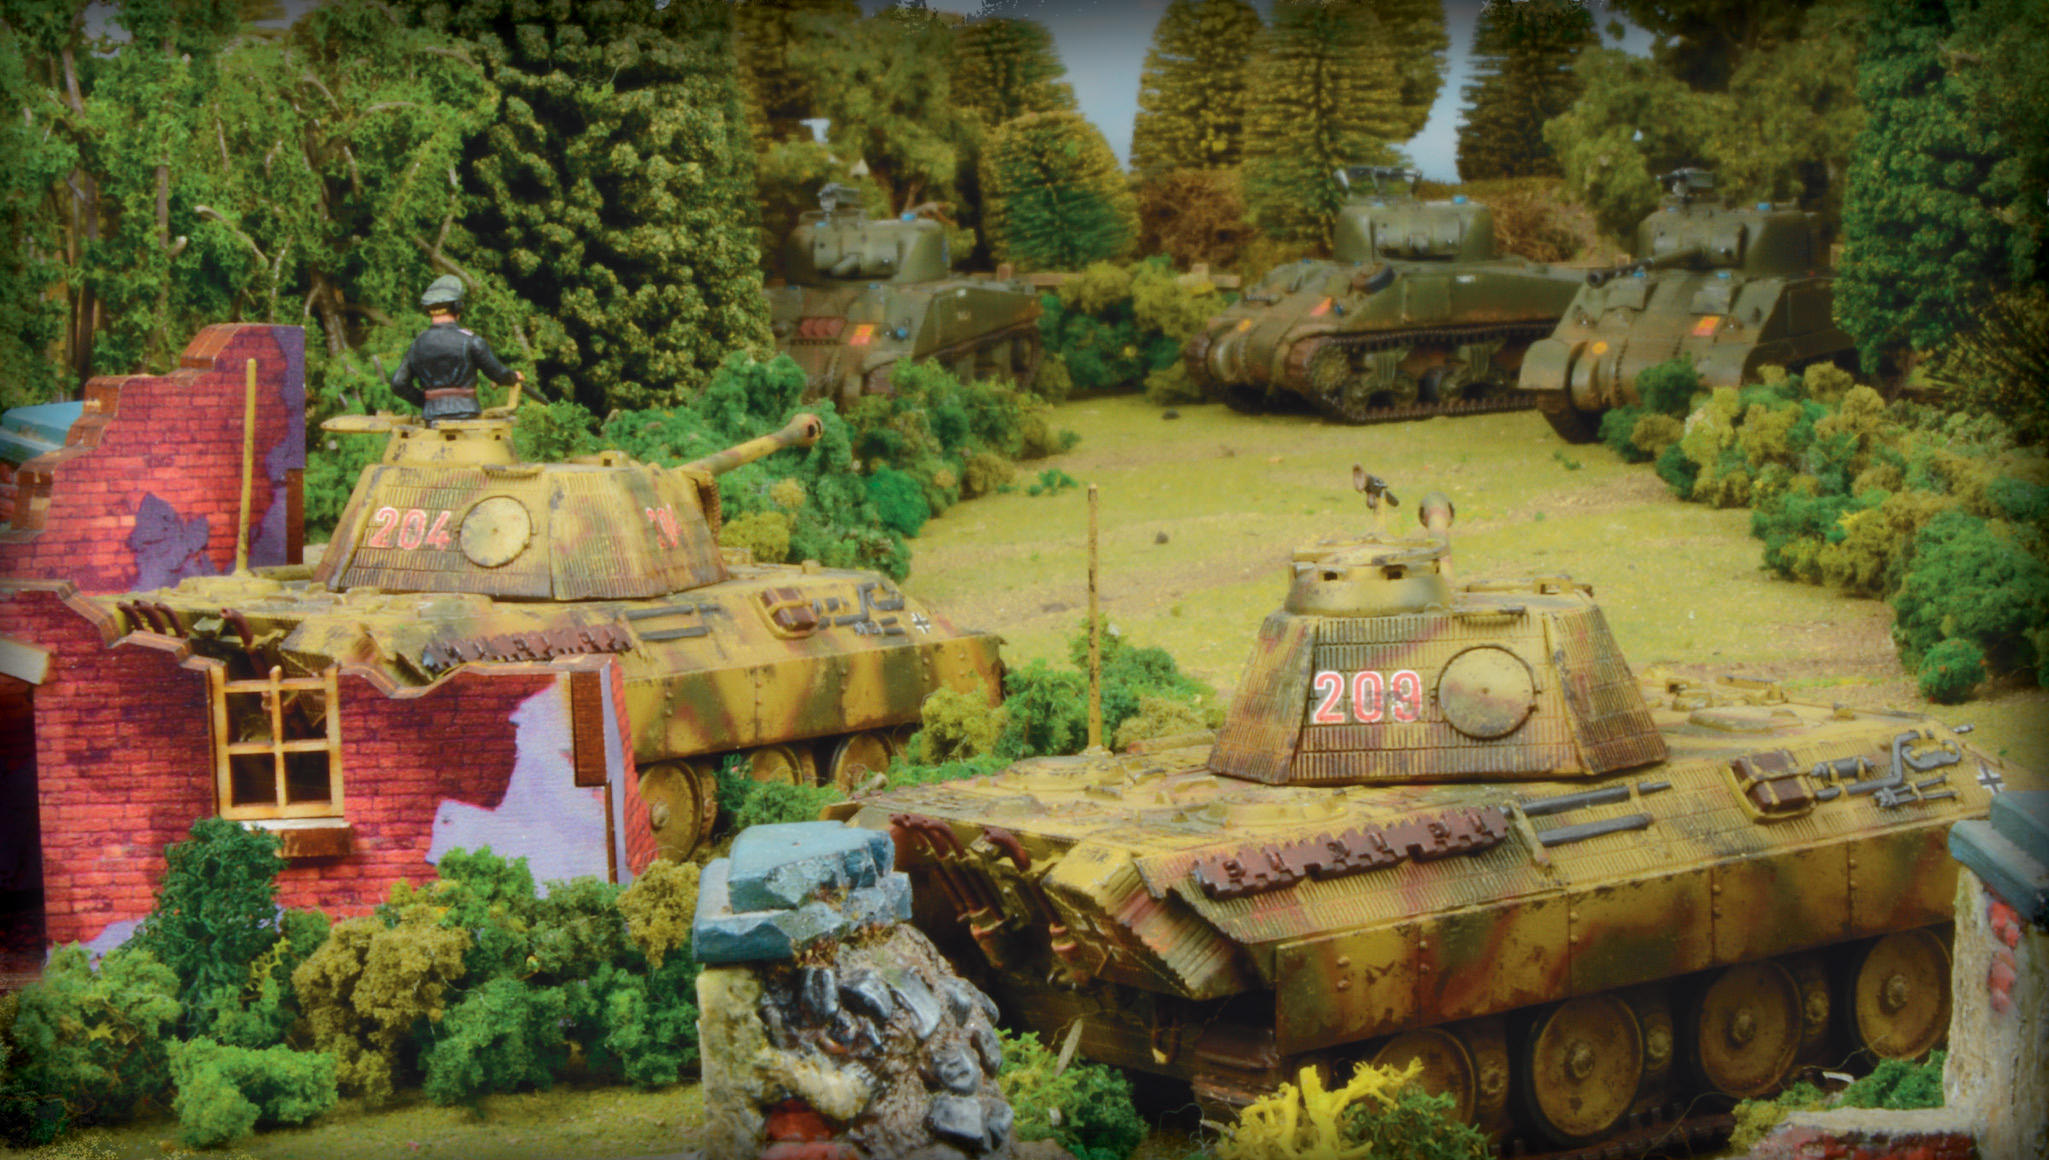 Incoming! Achtung Panzer! - Warlord Community